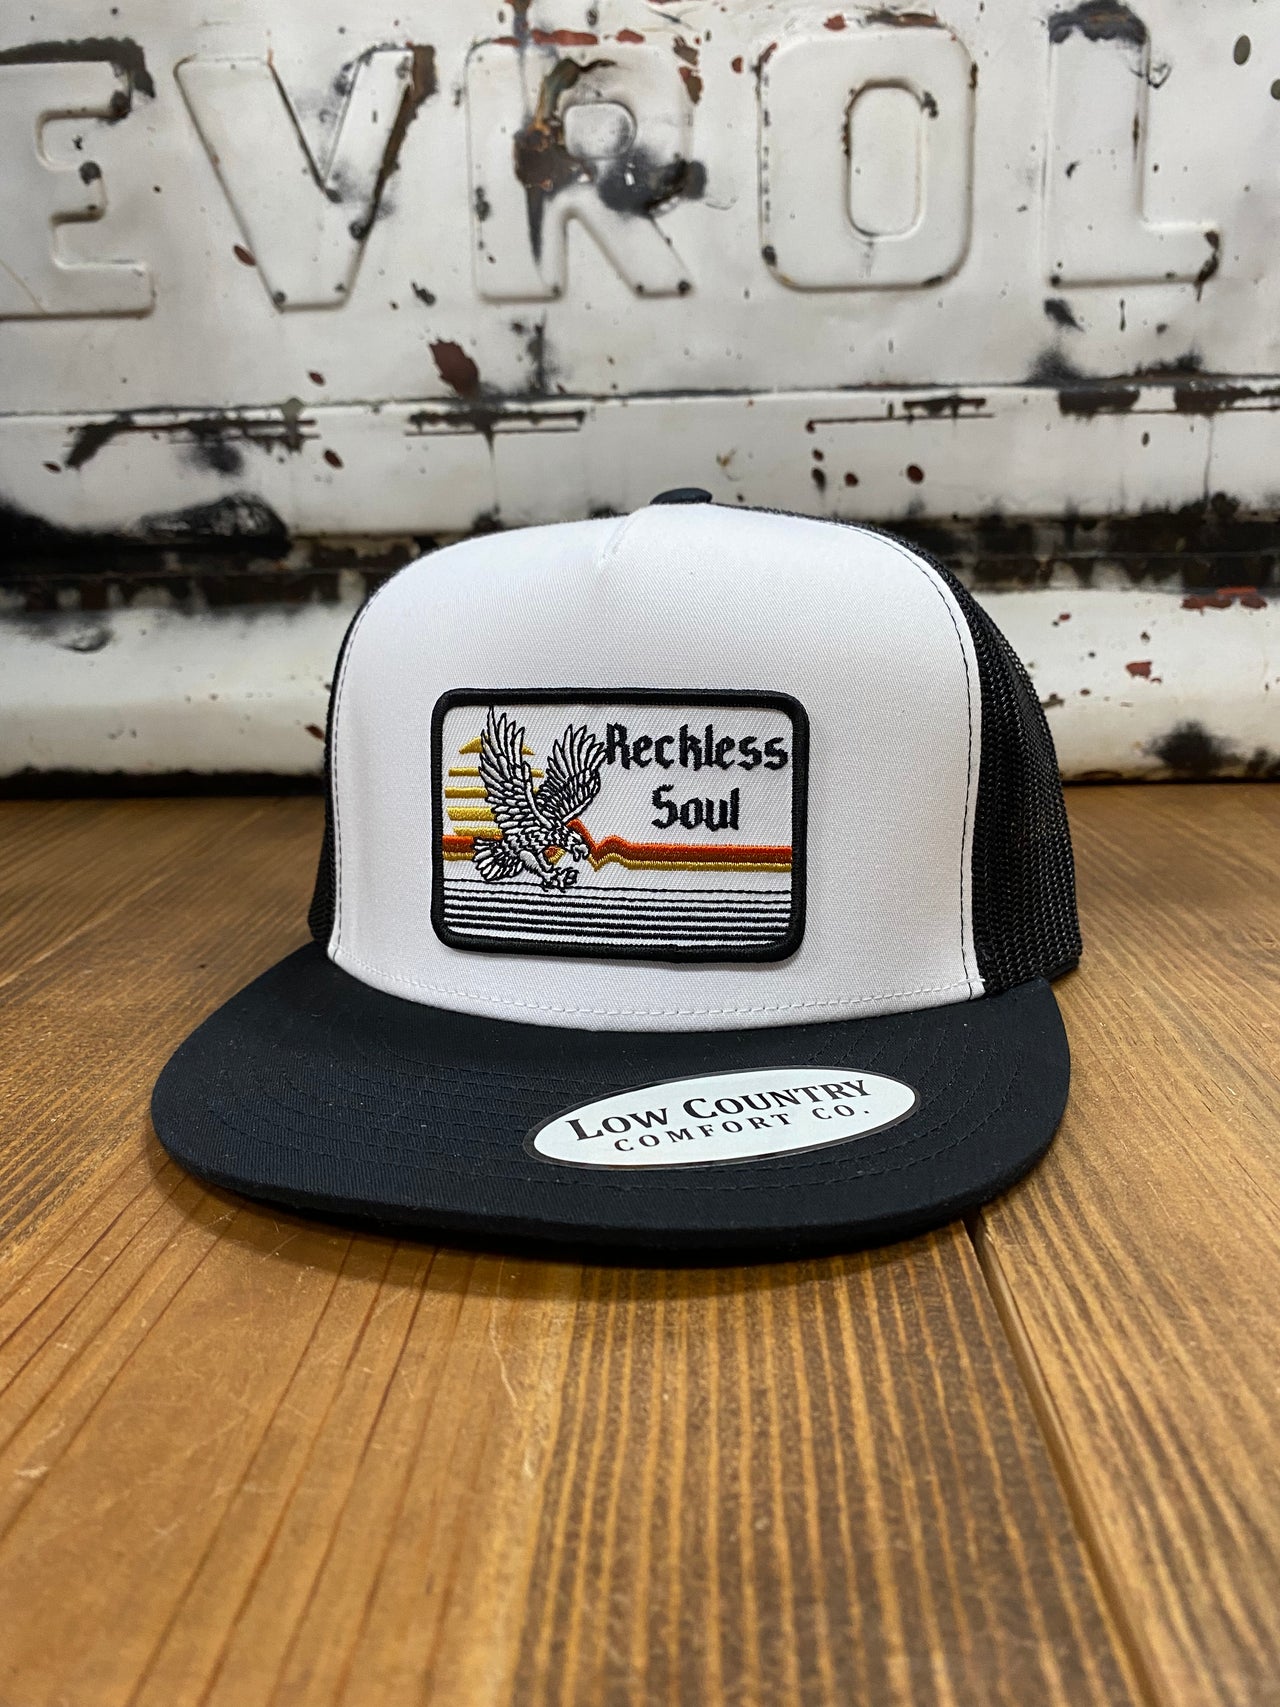 Black/White/Black Reckless Soul Eagle Patch 5 Panel Cap - A stylish masterpiece with a vibrant embroidered eagle patch. Durable 5-panel construction for a snug fit. Express your bold and untamed spirit with this daring accessory, perfect for any occasion.